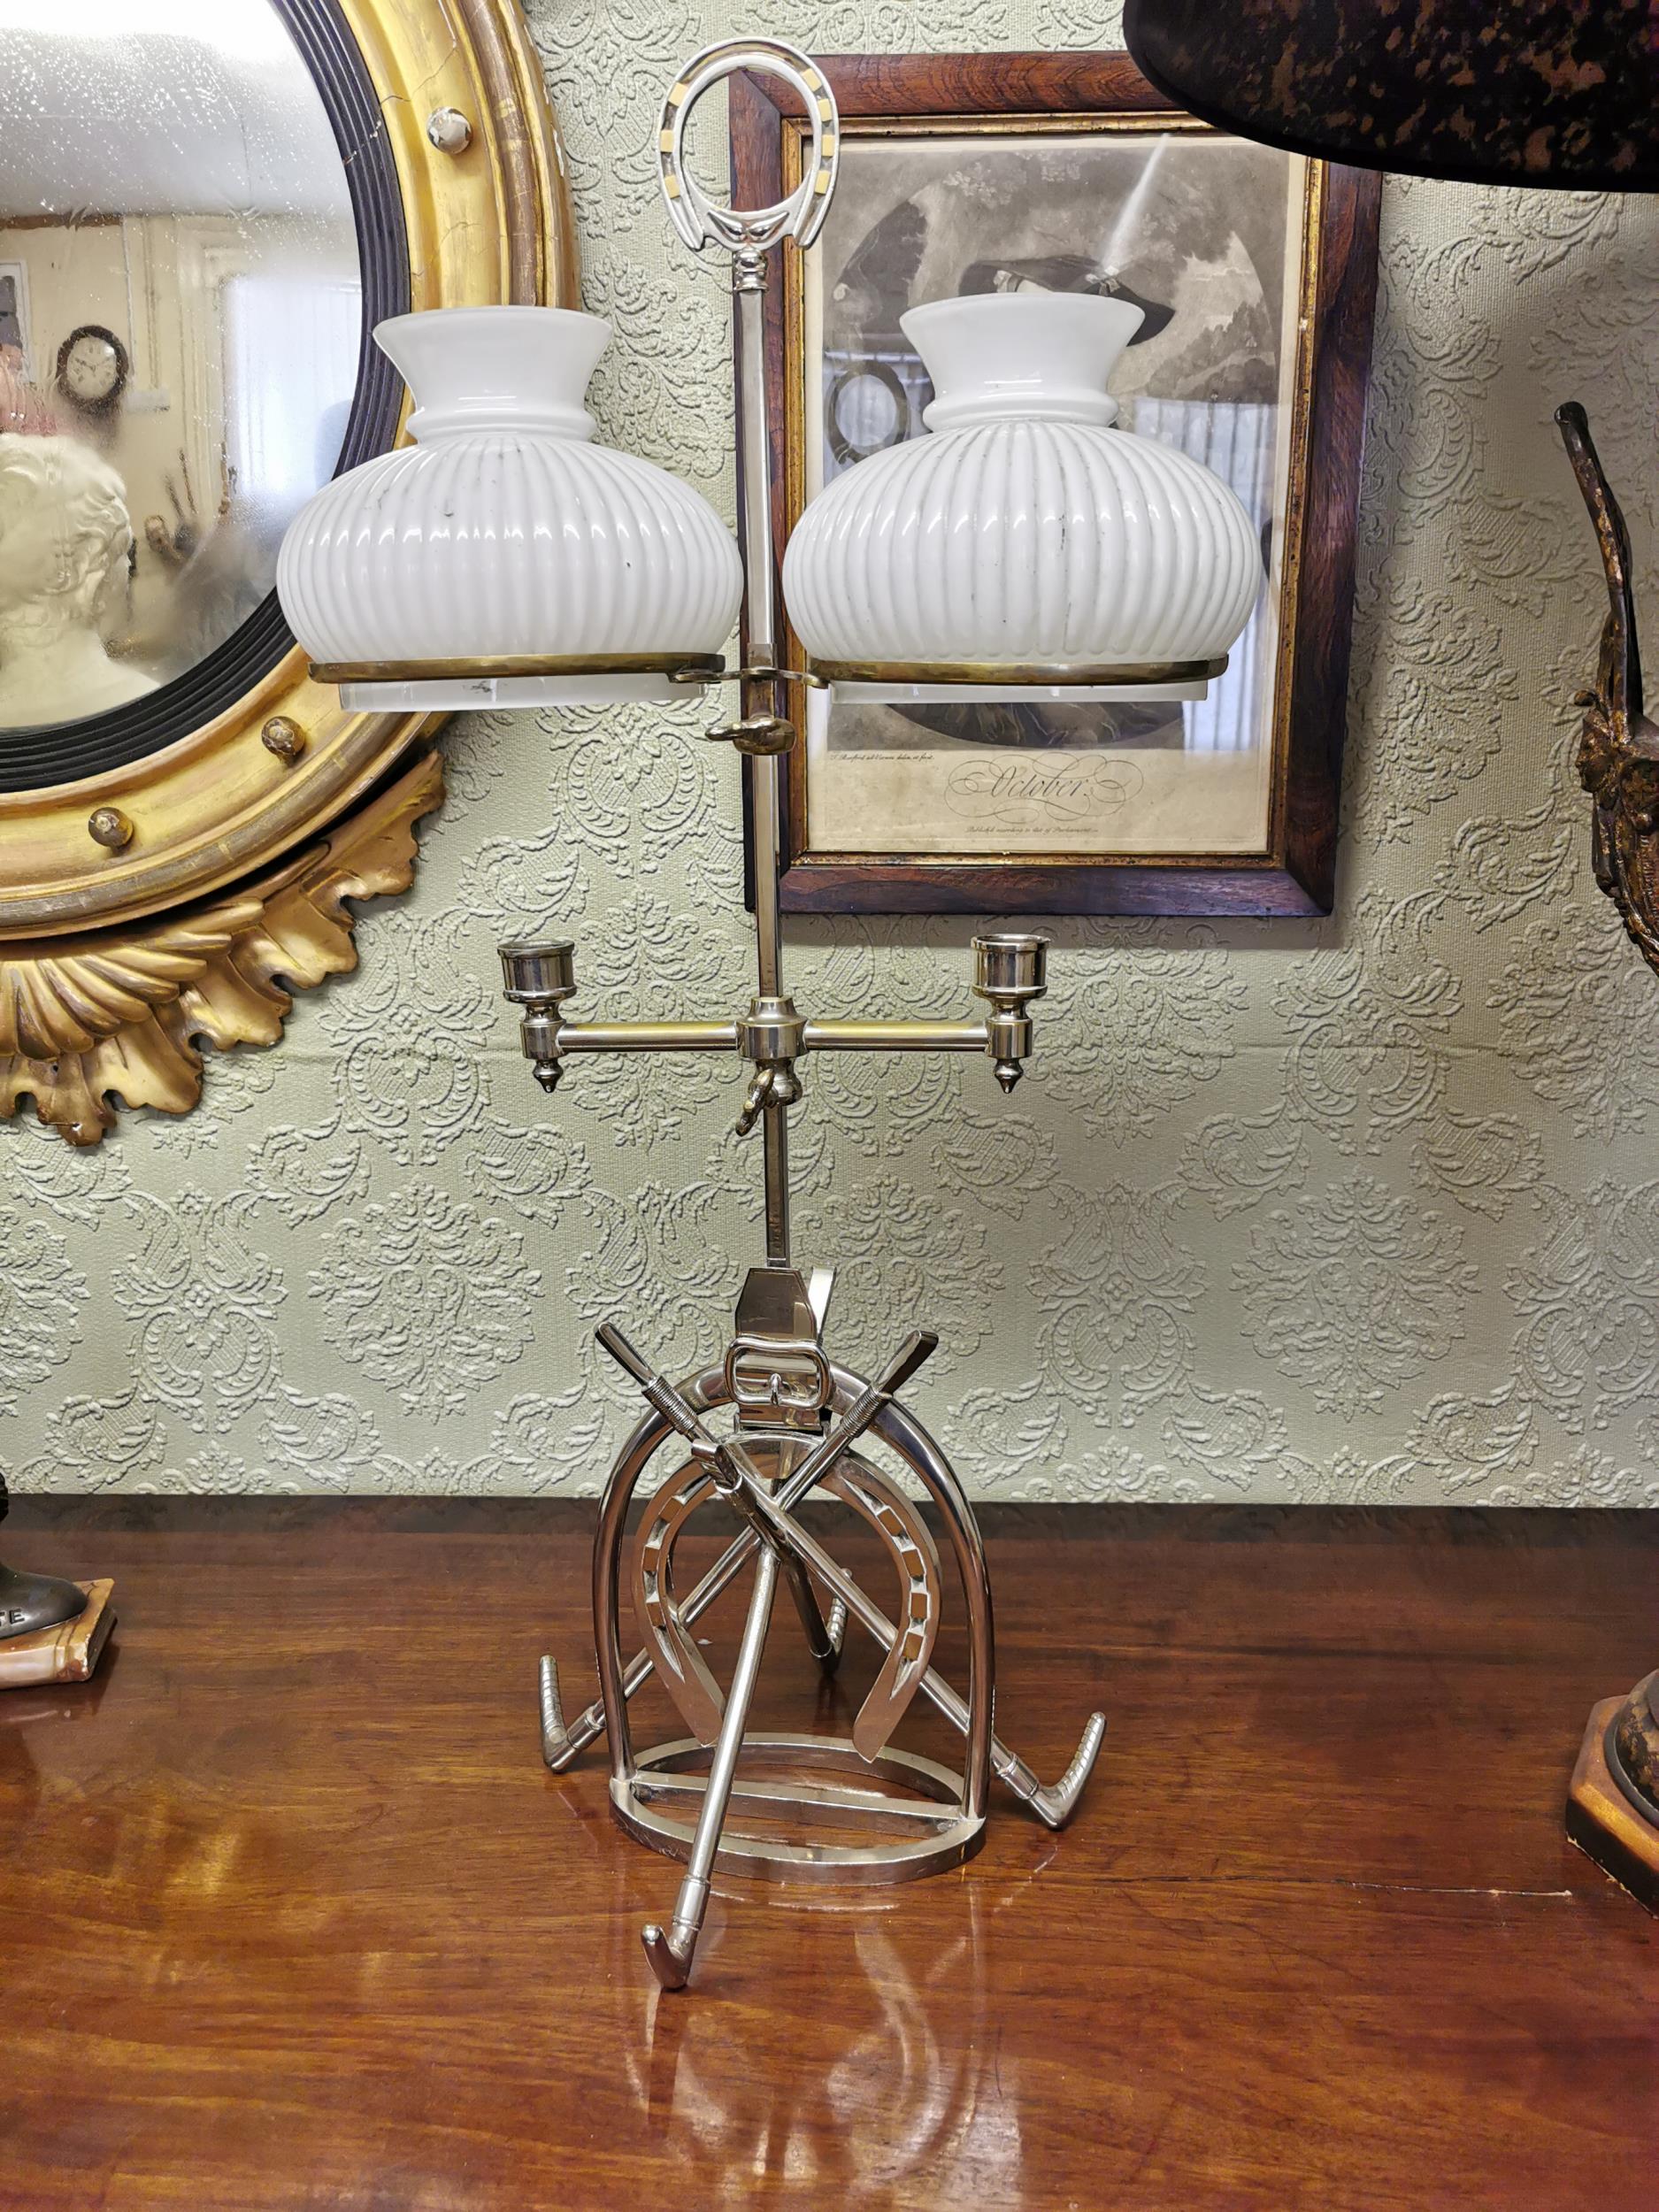 EPNS desk lamp in the form of a horse shoe with whips. { 66cm H X 35cm W X 26cm D }.